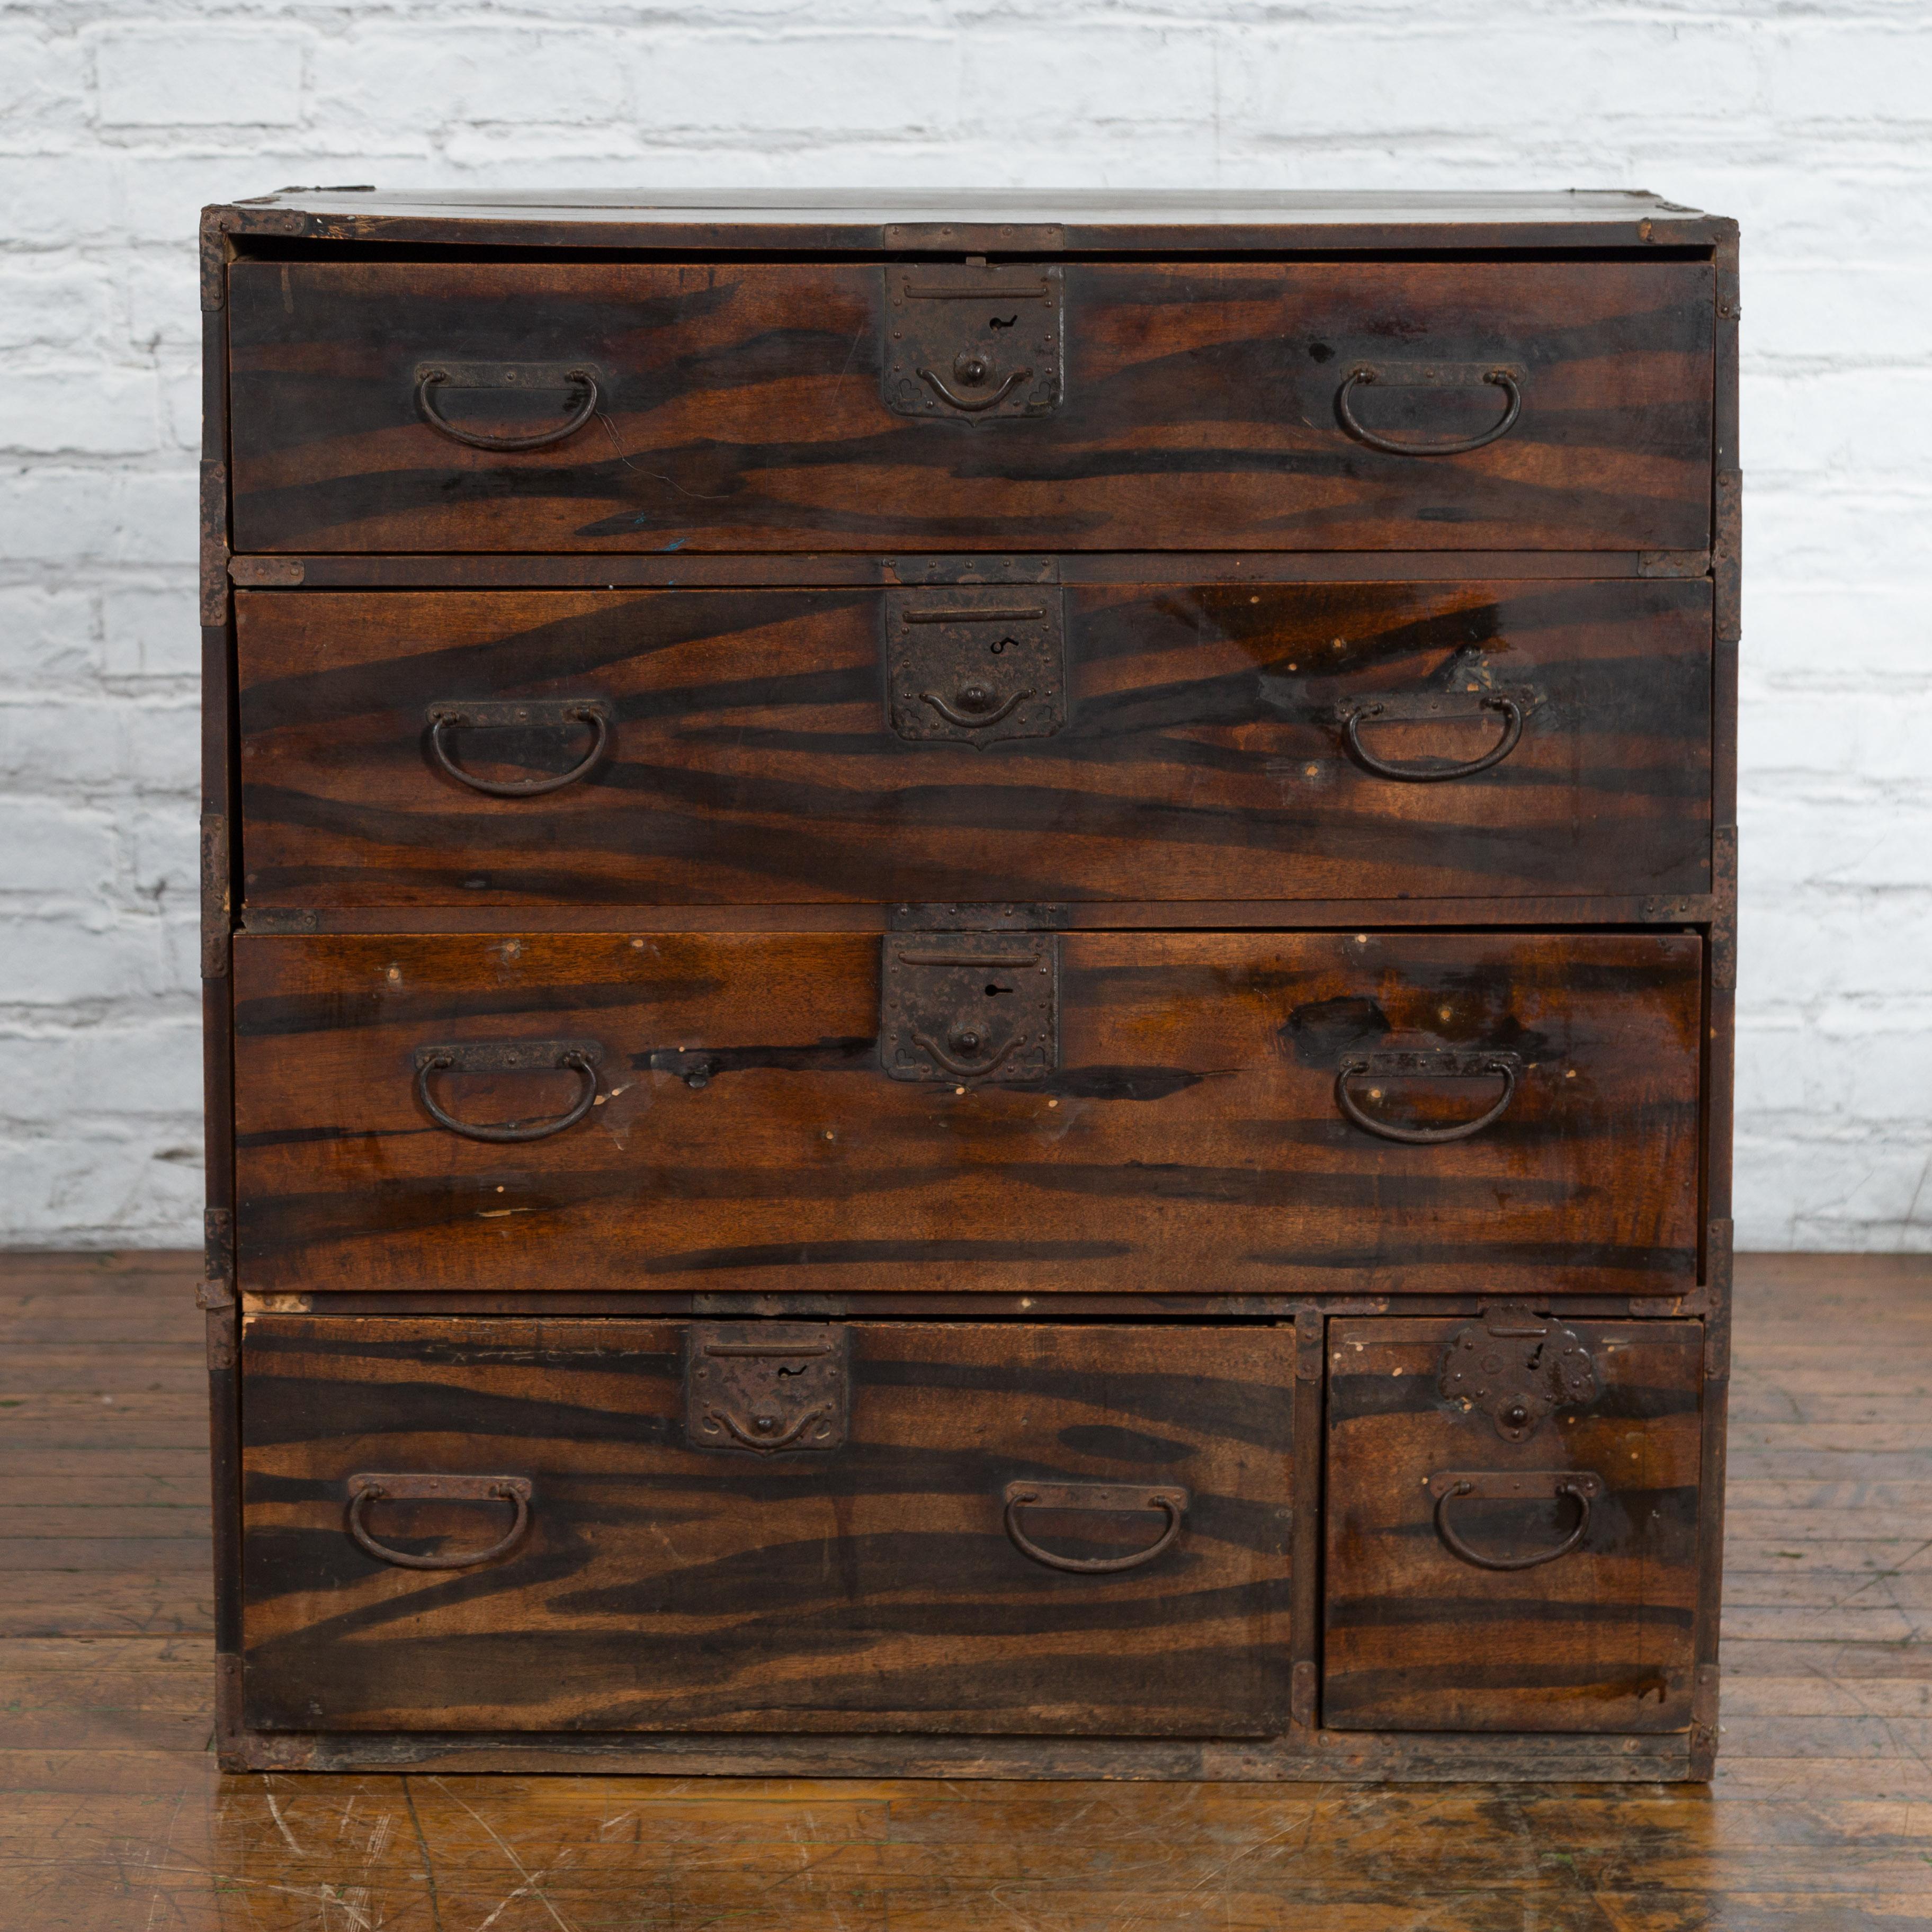 A Japanese Meiji period single section tansu clothing chest from the late 19th century in Isho-dansu style, with zebra wood, five drawers and carrying handles. Created in Japan during the Meiji period in the later years of the 19th century, this